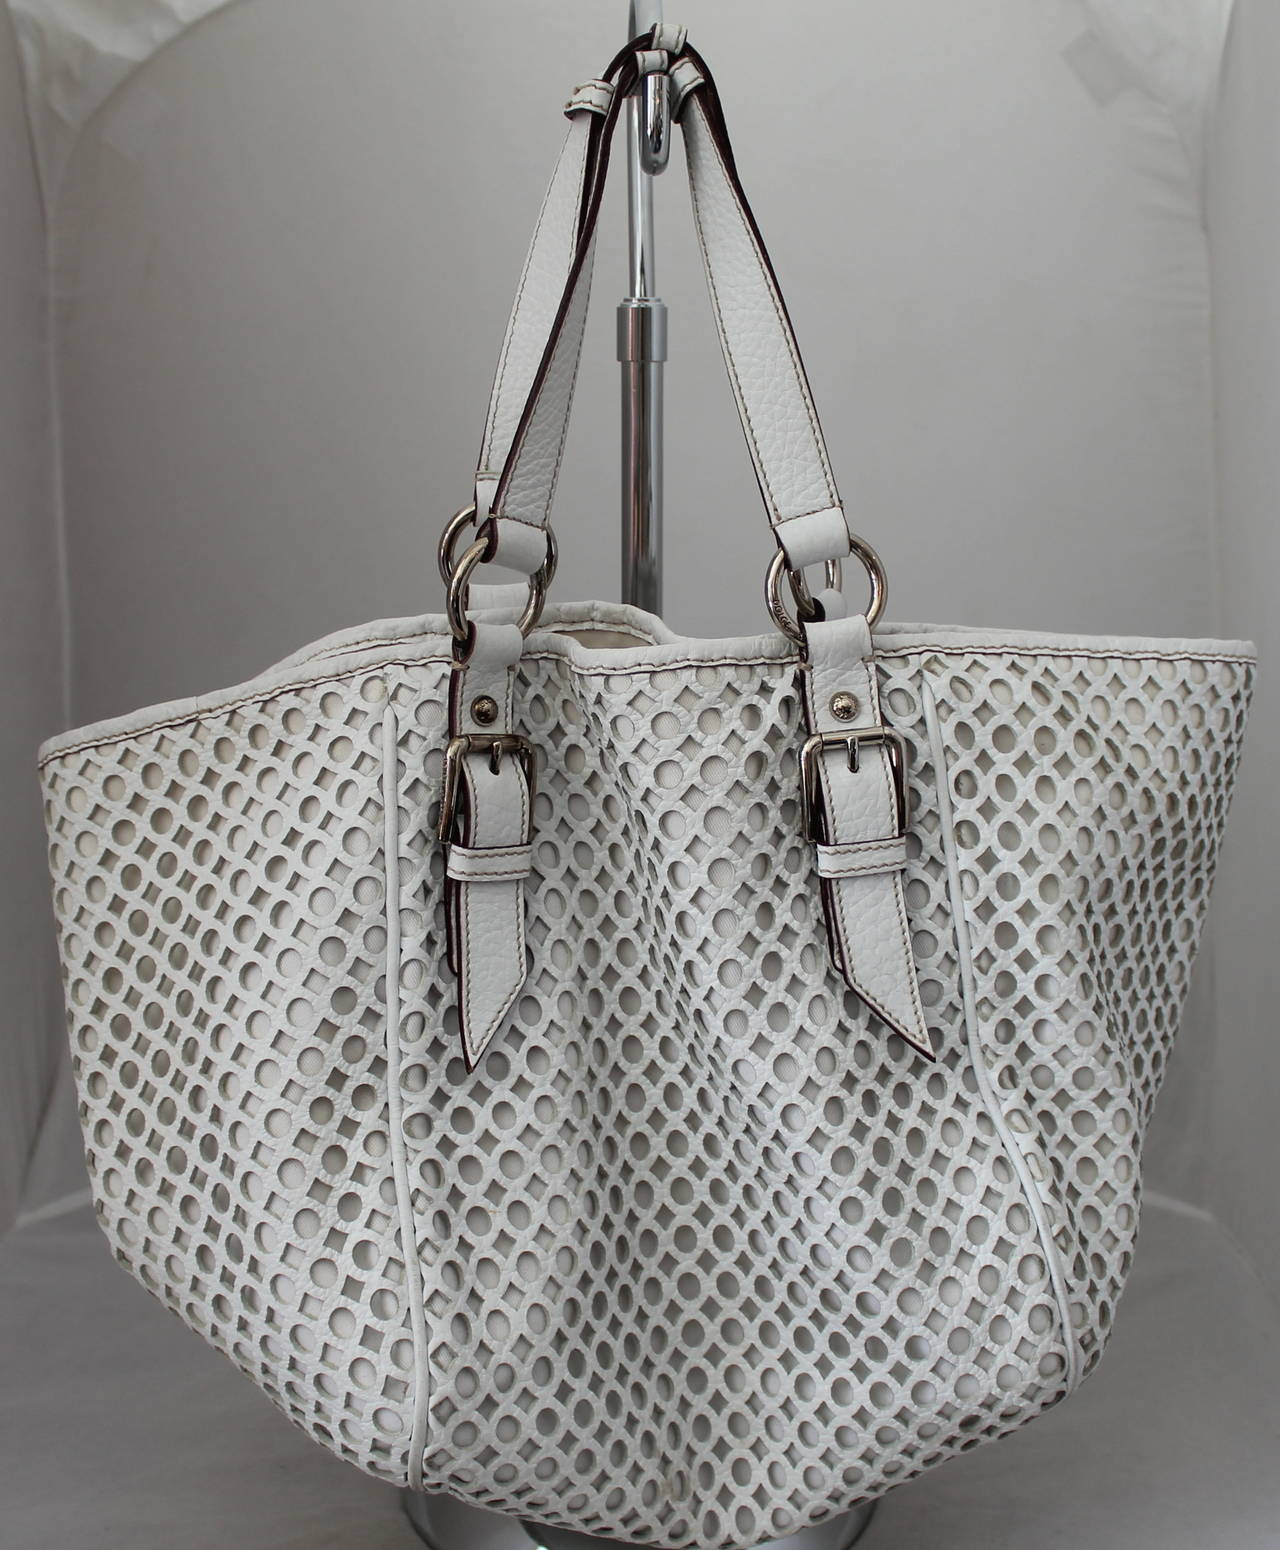 Dolce & Gabbana White Perforated Leather Shoulder Bag. This bag is in very good condition with the only visible wear being on the inside lining. There are some discolorations and stains, but the outside is in excellent shape. The bag has silver